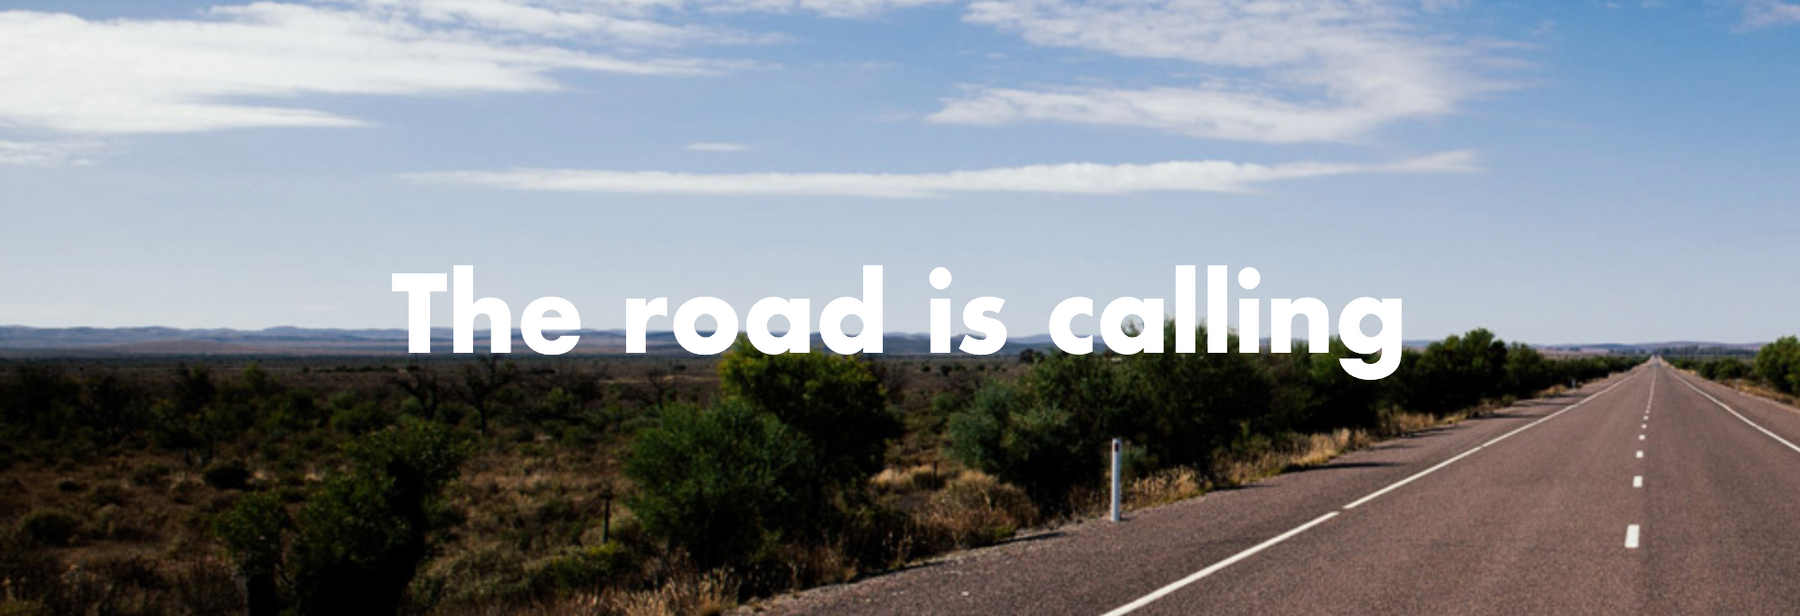 The road is calling